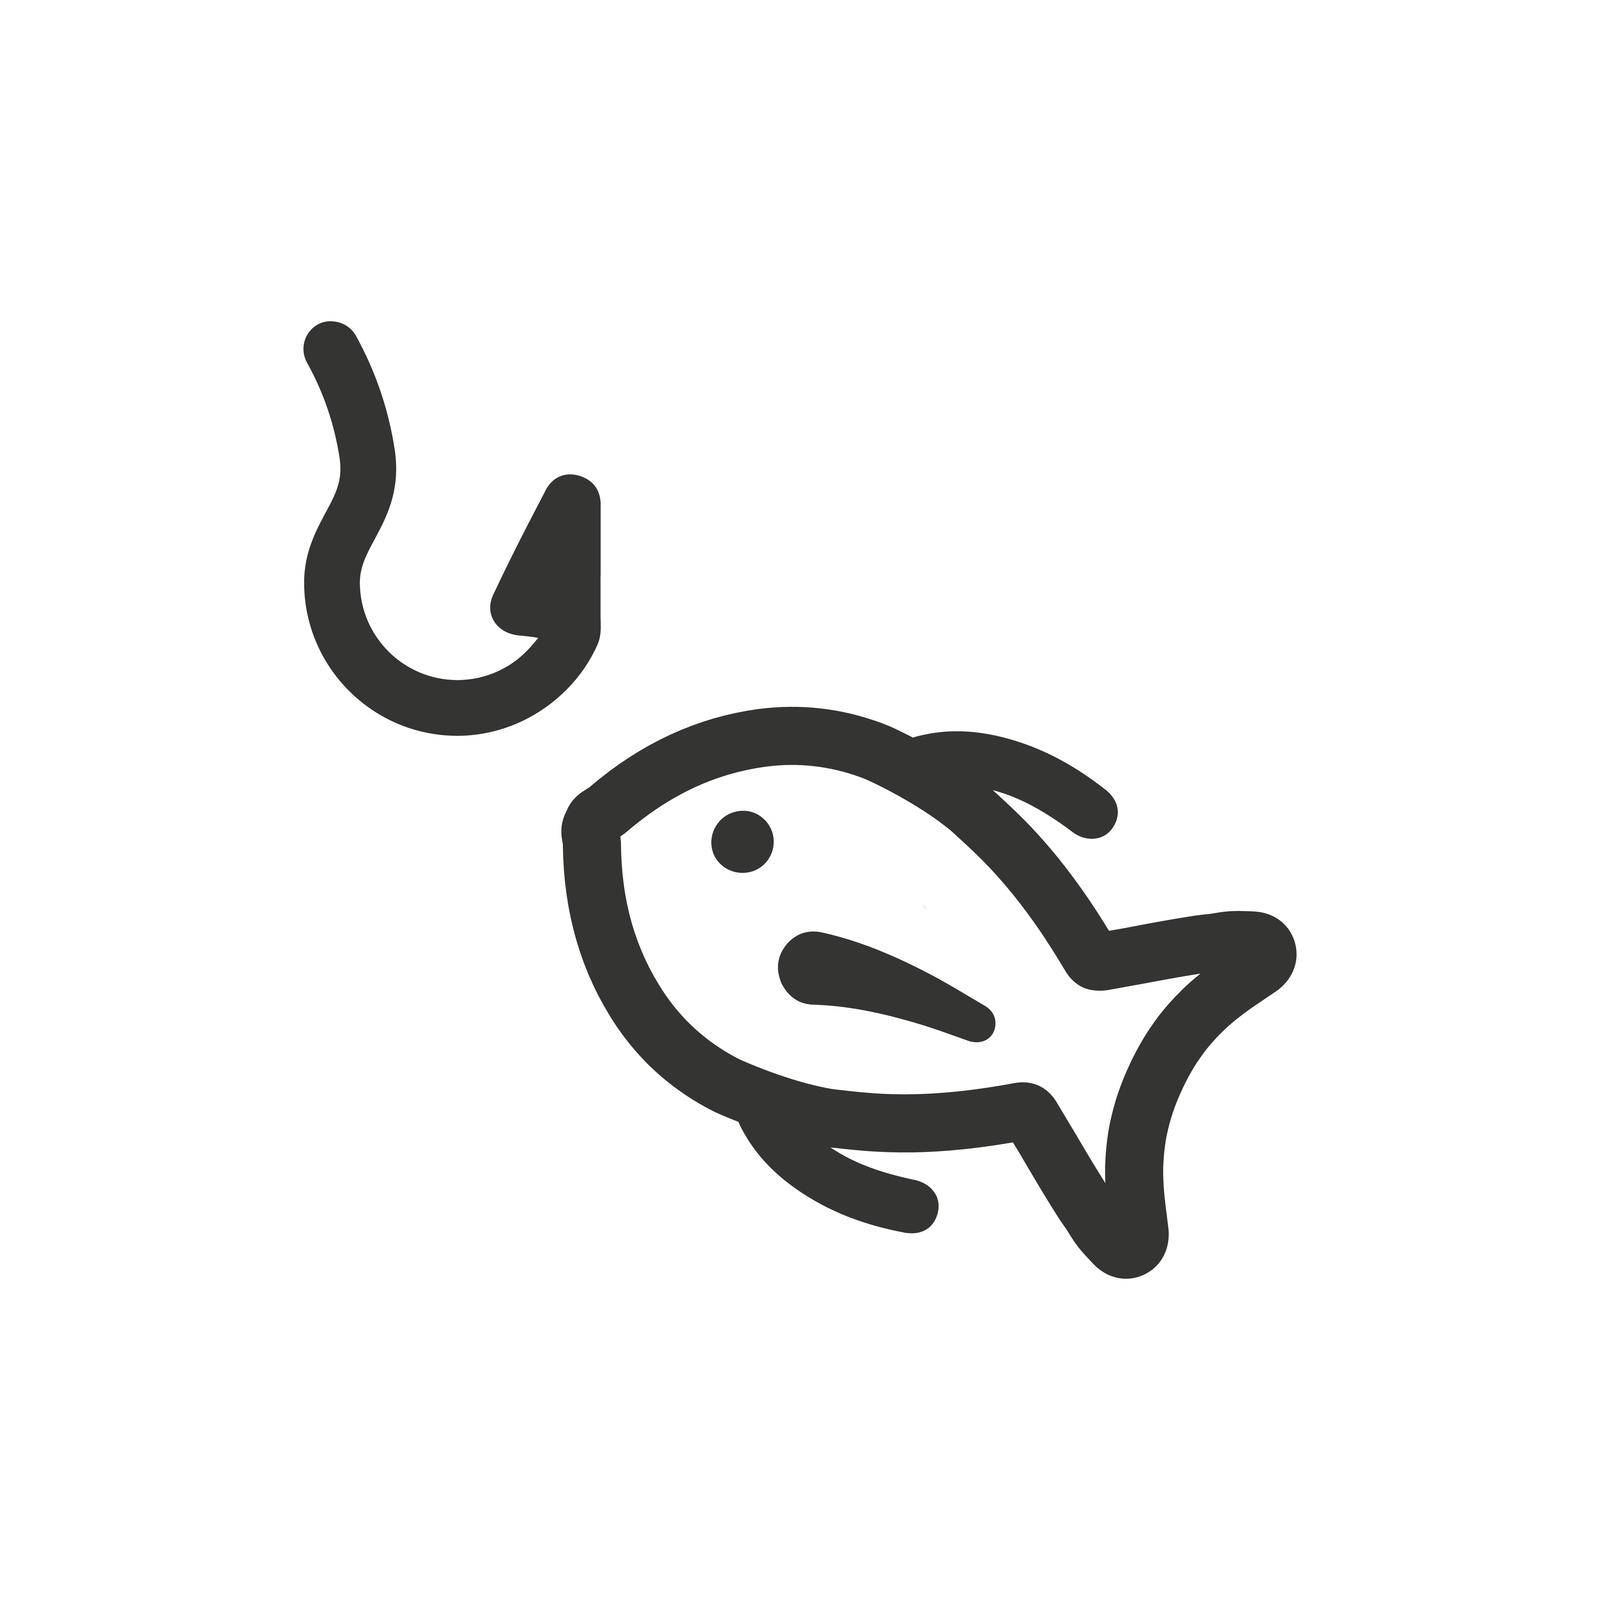 Fish Catching icon. Vector EPS file.